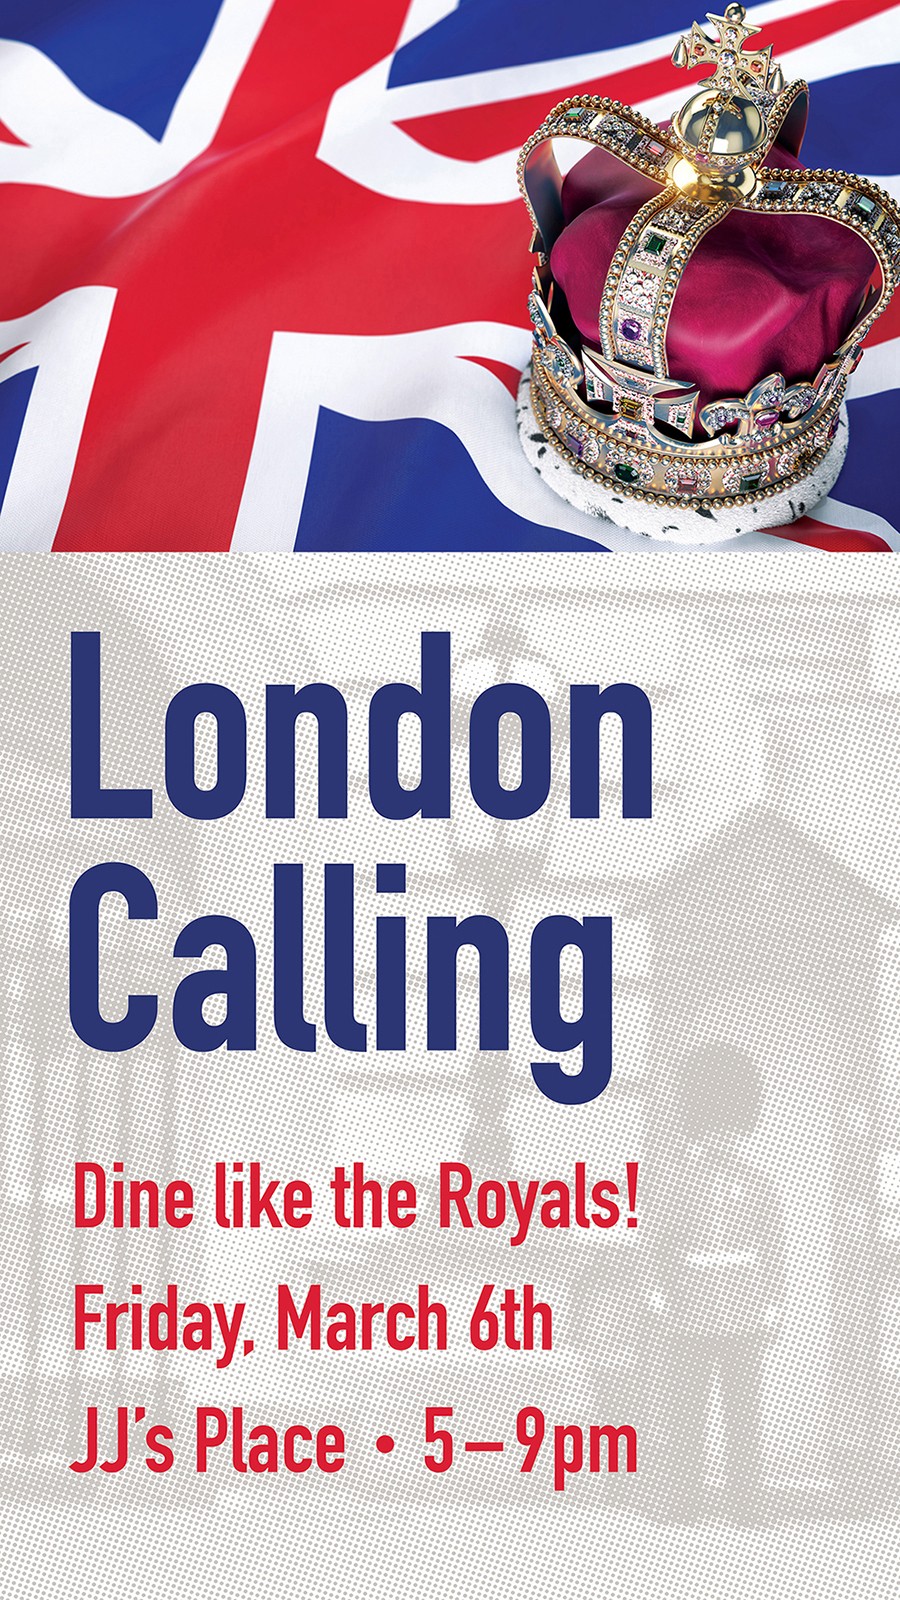 Dine like the Royals!